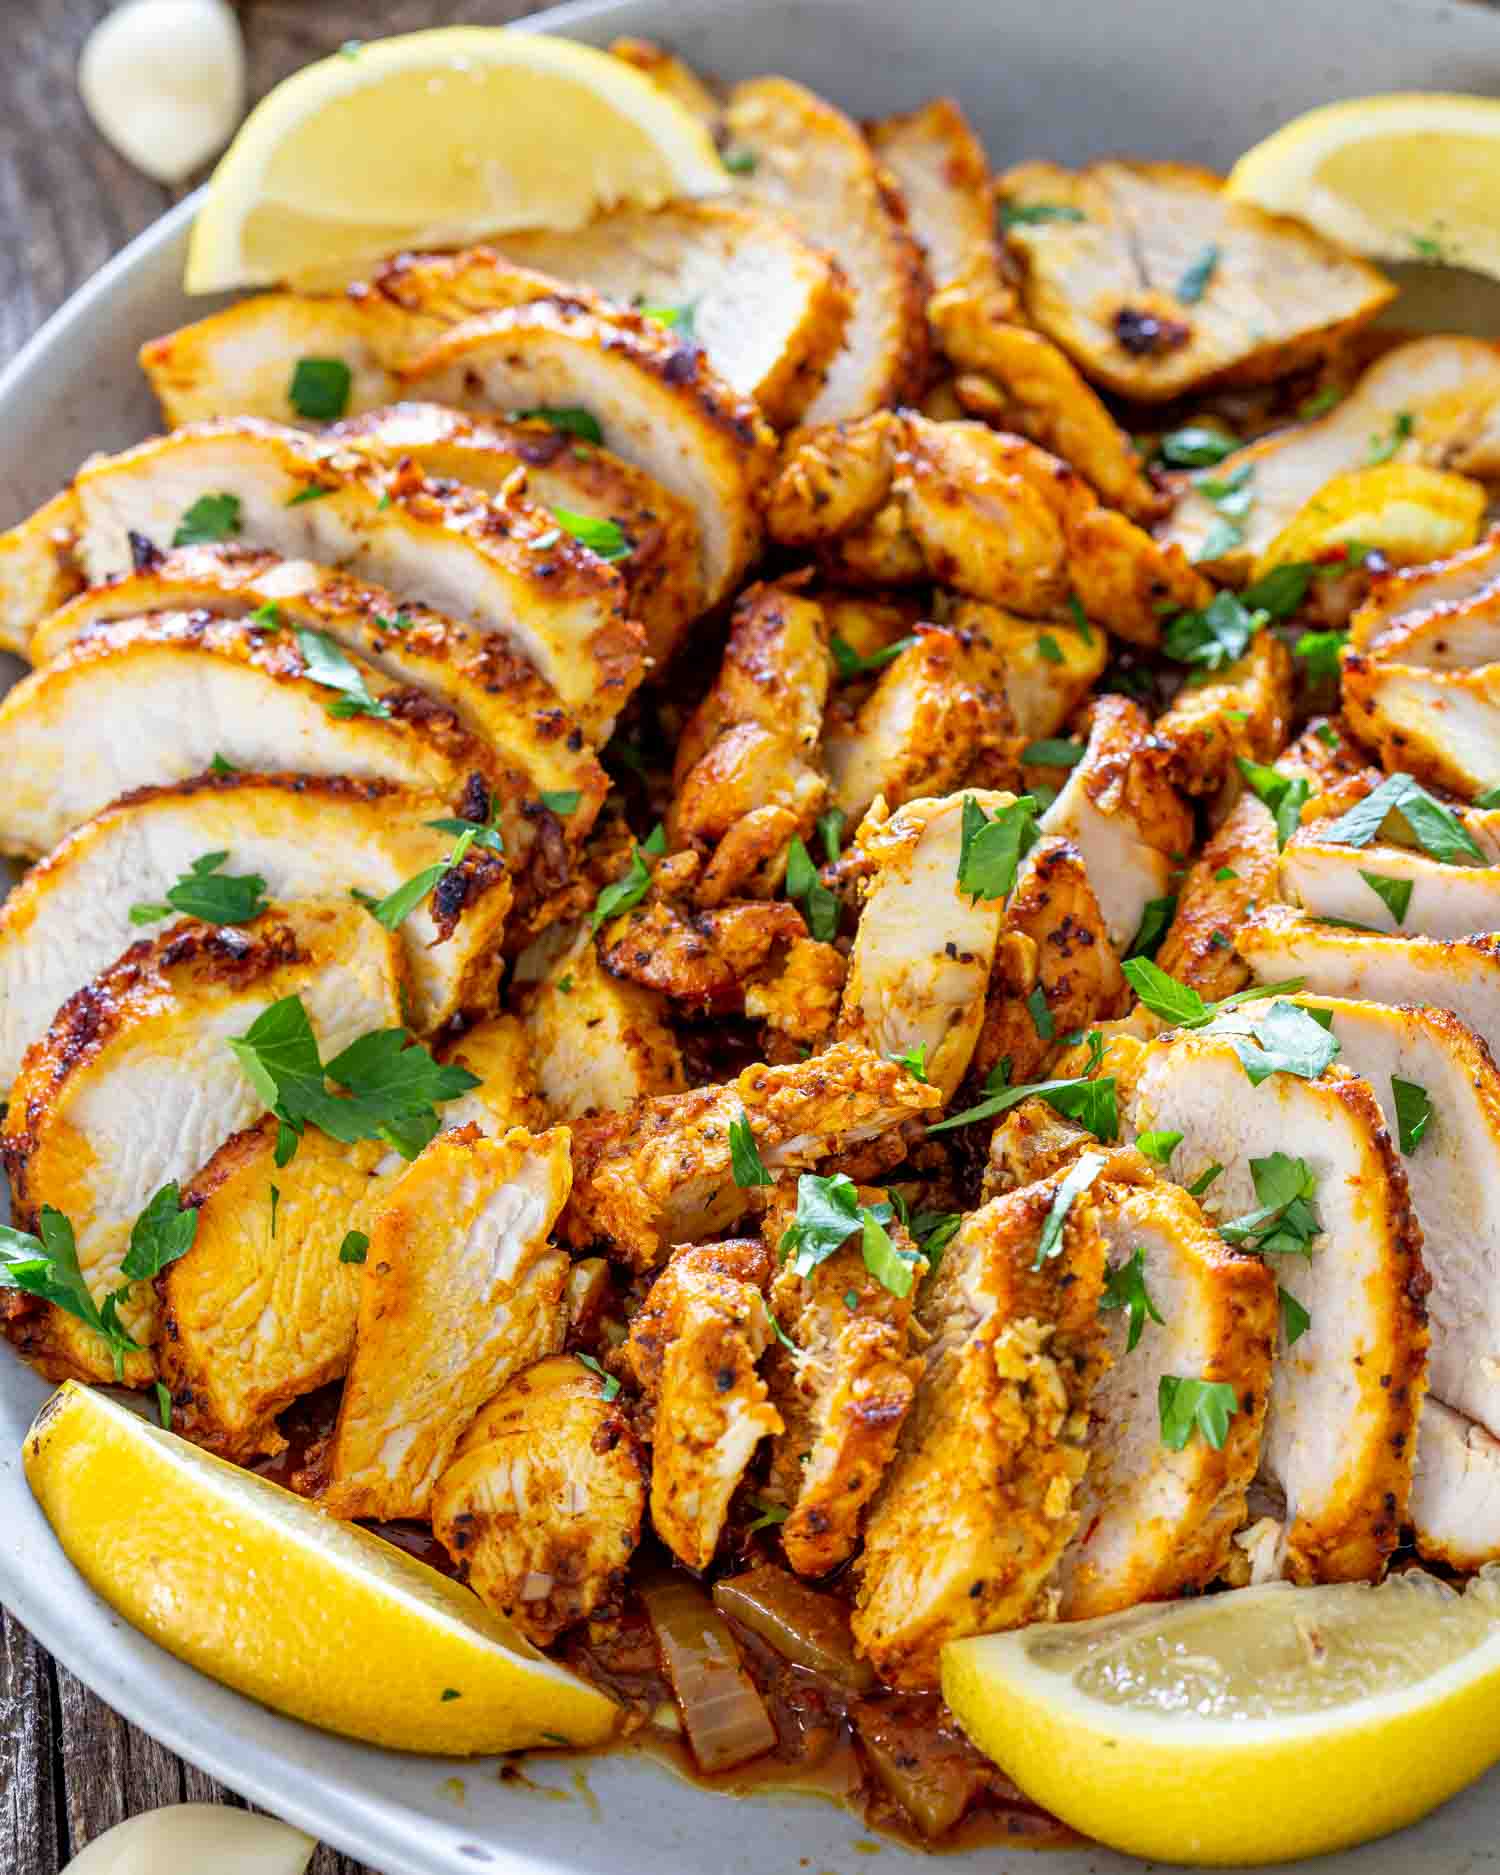 sliced chicken shawarma in a white bowl garnished with parsley and lemon wedges.